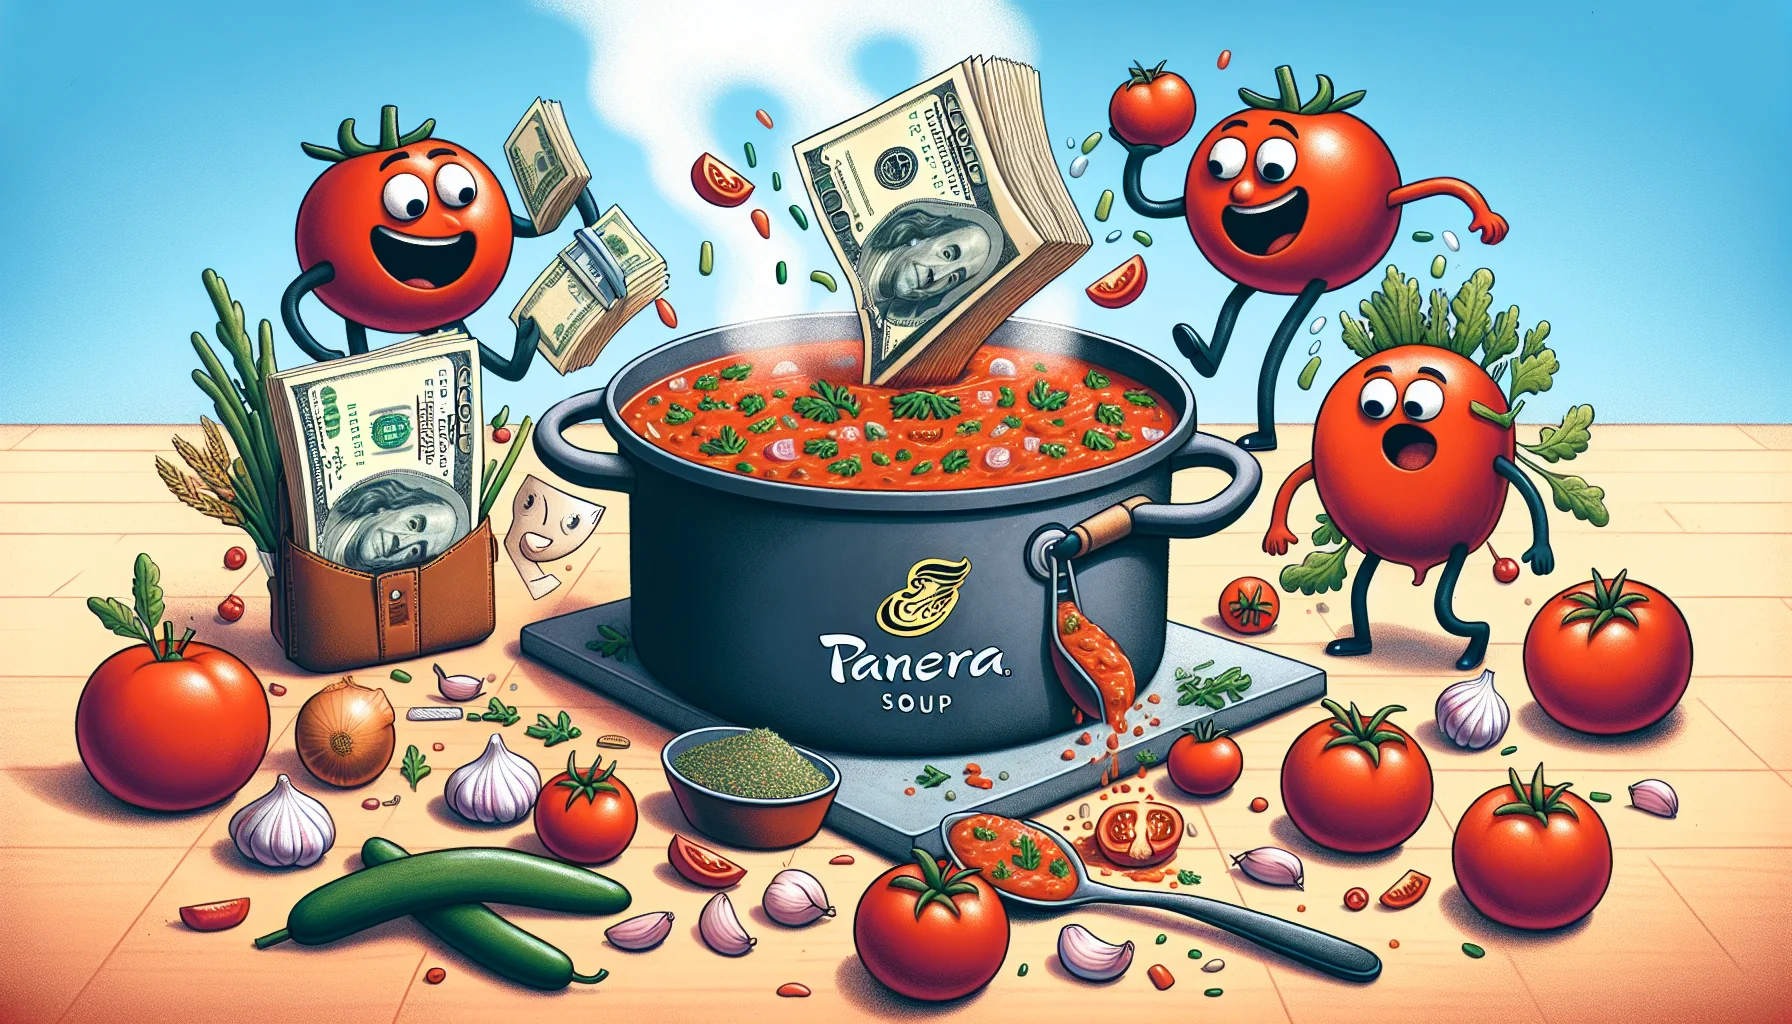 Create a humorously enticing image showcasing a Panera-inspired tomato soup recipe that encourages people to eat healthier for less money. Imagine a big pot of steamy tomato soup surrounded by fresh tomatoes, onions, garlic, and other necessary ingredients. A creative scene is featured that symbolizes budget-friendly nutrition. Perhaps a cartoon-style wallet is happily dancing around the pot, sprinkling herbs into it while a group of surprised dollar bills are looking on. The background is full of healthy vegetables and fruits indicating the richness of nutrition affordable at low costs.